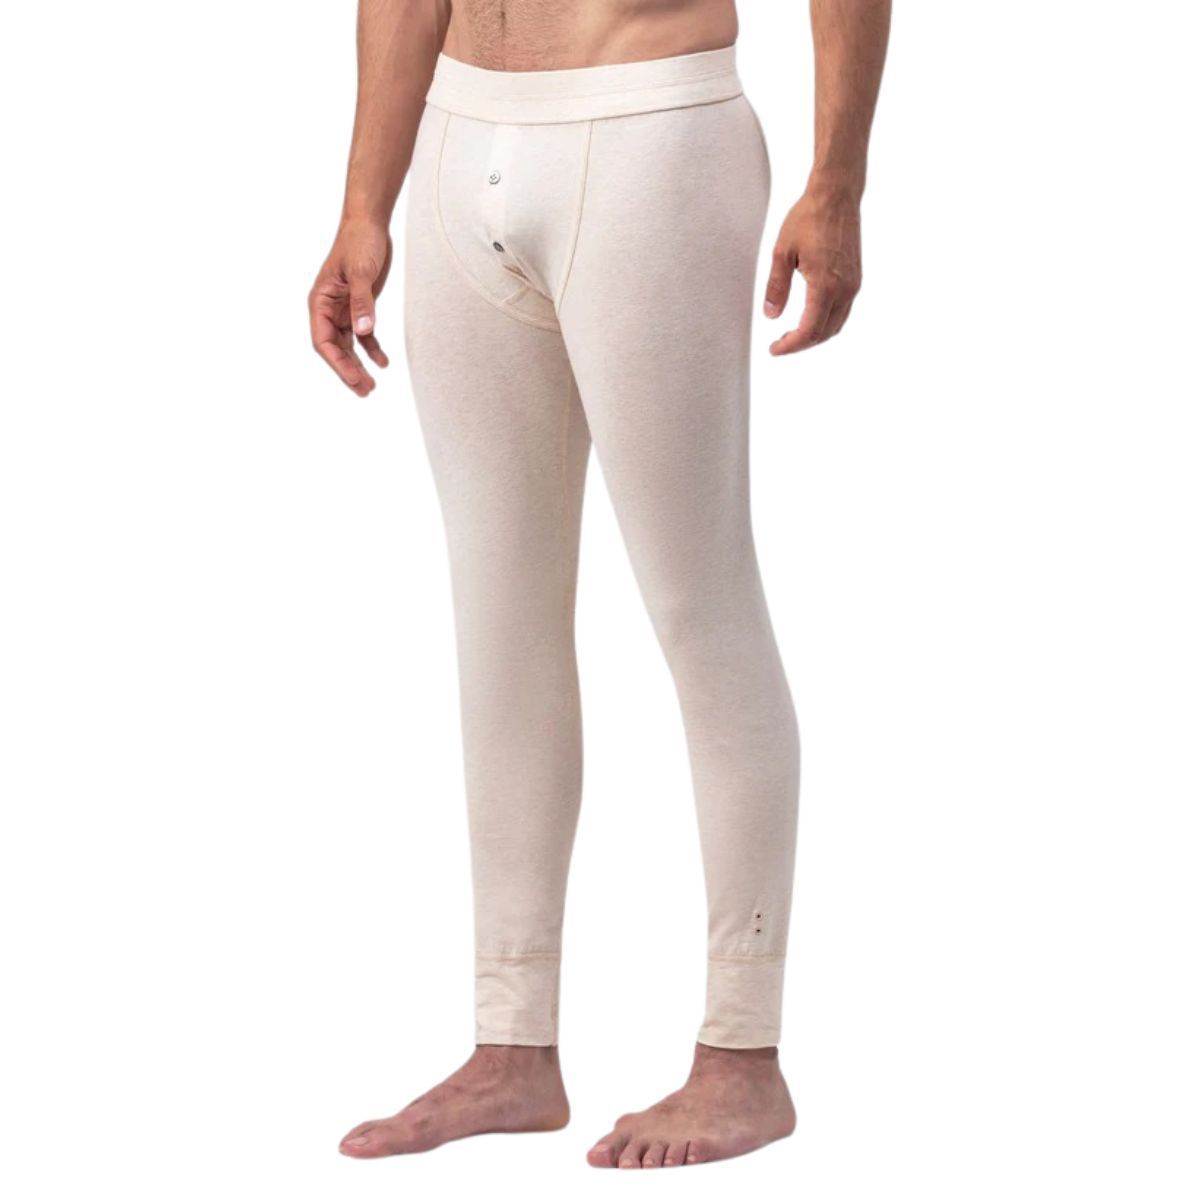 Buy Women s 2pc Thermal Underwear Top Bottom Fleece Lined Long Johns  by  Rocky White Small at Amazonin